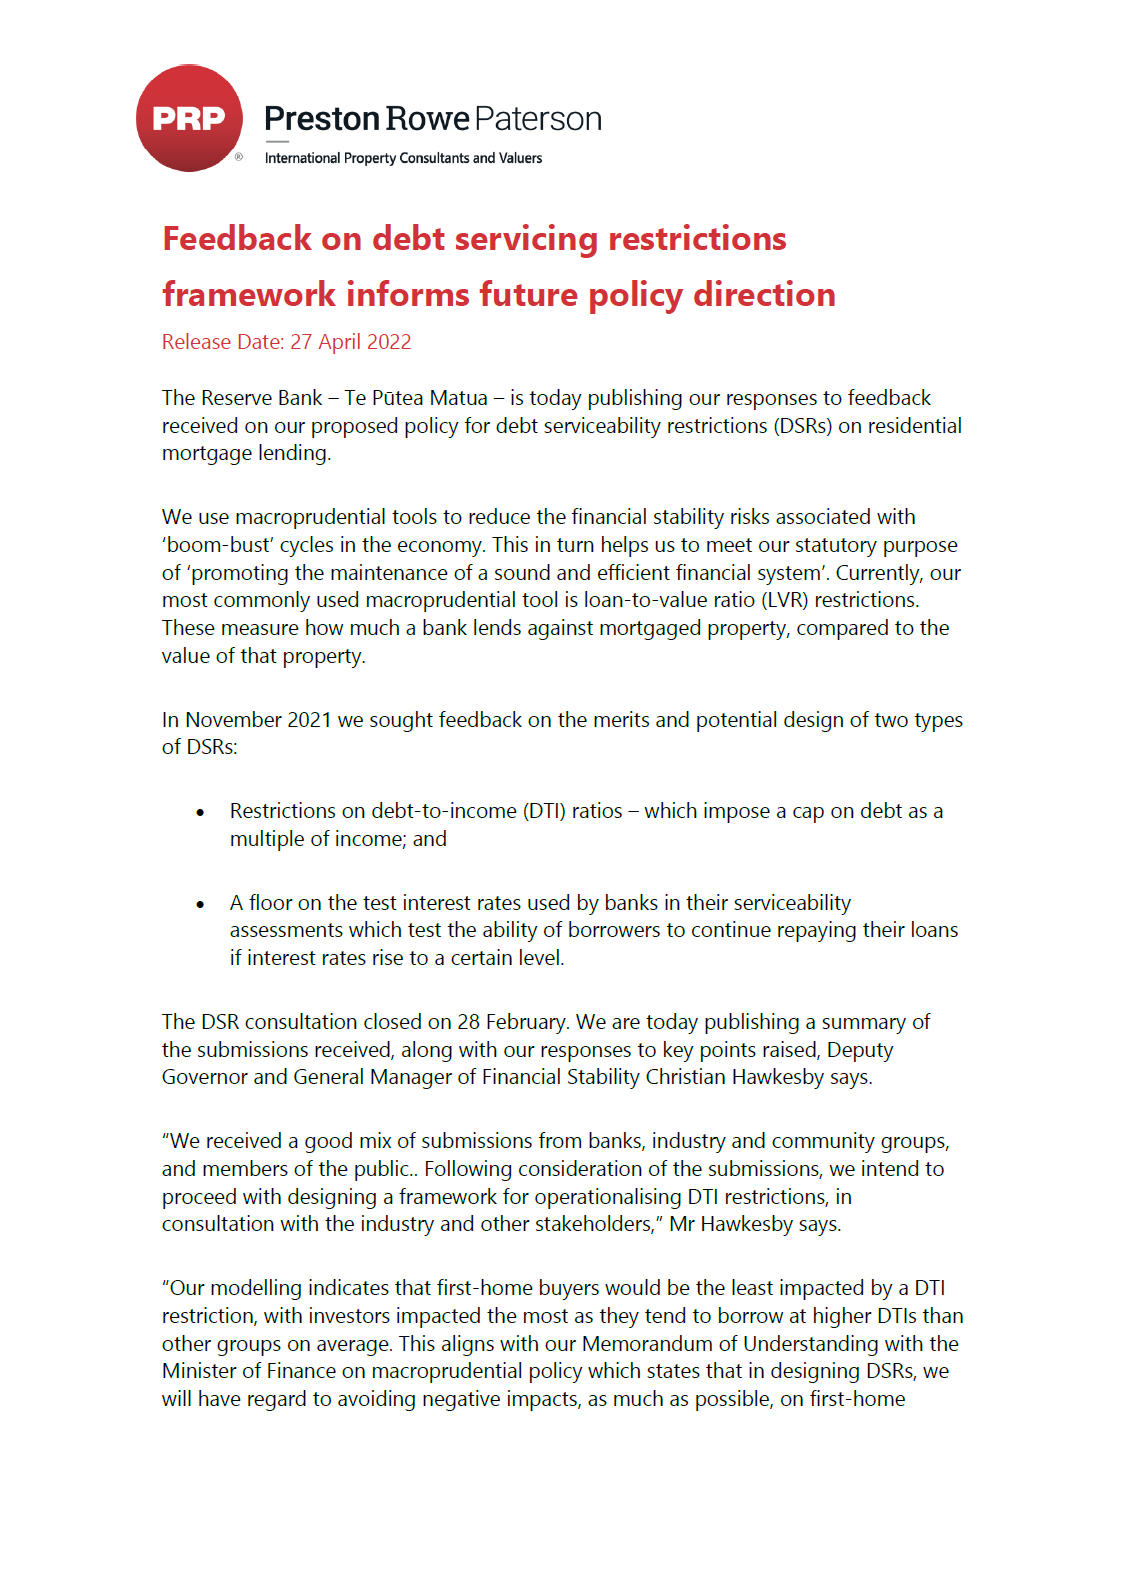 27.04.2022 - Feedback on debt servicing restrictions framework informs future policy direction